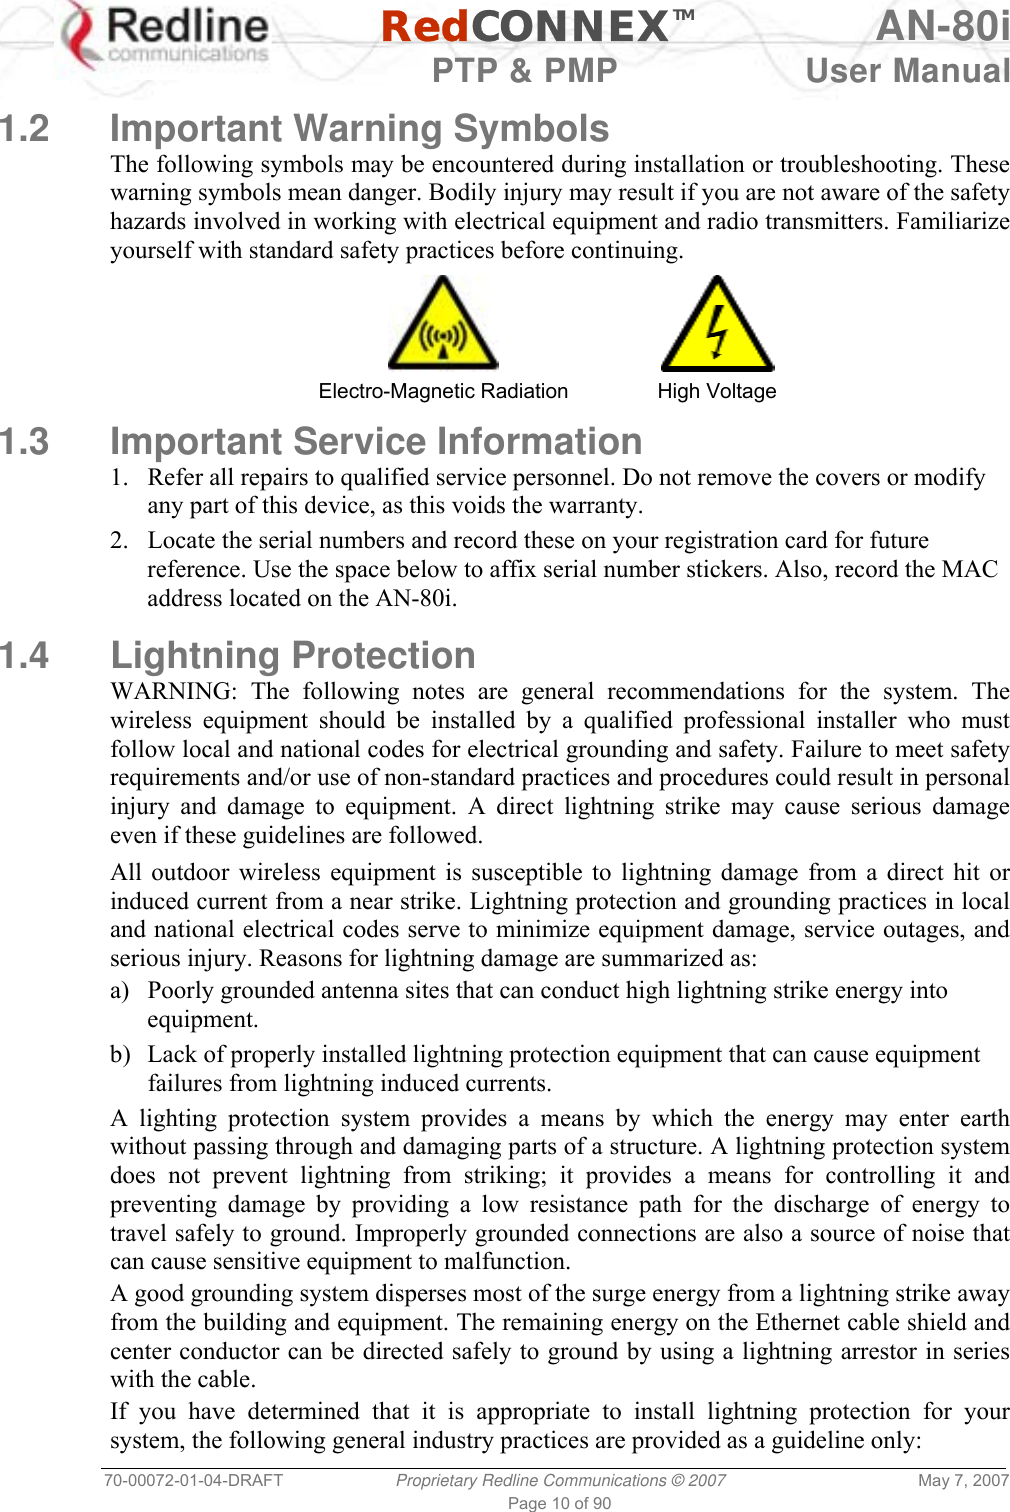   RedCONNEXTM AN-80i   PTP &amp; PMP  User Manual 70-00072-01-04-DRAFT  Proprietary Redline Communications © 2007  May 7, 2007 Page 10 of 90  1.2 Important Warning Symbols The following symbols may be encountered during installation or troubleshooting. These warning symbols mean danger. Bodily injury may result if you are not aware of the safety hazards involved in working with electrical equipment and radio transmitters. Familiarize yourself with standard safety practices before continuing.   Electro-Magnetic Radiation  High Voltage 1.3  Important Service Information 1.  Refer all repairs to qualified service personnel. Do not remove the covers or modify any part of this device, as this voids the warranty. 2.  Locate the serial numbers and record these on your registration card for future reference. Use the space below to affix serial number stickers. Also, record the MAC address located on the AN-80i.  1.4 Lightning Protection WARNING: The following notes are general recommendations for the system. The wireless equipment should be installed by a qualified professional installer who must follow local and national codes for electrical grounding and safety. Failure to meet safety requirements and/or use of non-standard practices and procedures could result in personal injury and damage to equipment. A direct lightning strike may cause serious damage even if these guidelines are followed. All outdoor wireless equipment is susceptible to lightning damage from a direct hit or induced current from a near strike. Lightning protection and grounding practices in local and national electrical codes serve to minimize equipment damage, service outages, and serious injury. Reasons for lightning damage are summarized as: a)  Poorly grounded antenna sites that can conduct high lightning strike energy into equipment. b)  Lack of properly installed lightning protection equipment that can cause equipment failures from lightning induced currents. A lighting protection system provides a means by which the energy may enter earth without passing through and damaging parts of a structure. A lightning protection system does not prevent lightning from striking; it provides a means for controlling it and preventing damage by providing a low resistance path for the discharge of energy to travel safely to ground. Improperly grounded connections are also a source of noise that can cause sensitive equipment to malfunction. A good grounding system disperses most of the surge energy from a lightning strike away from the building and equipment. The remaining energy on the Ethernet cable shield and center conductor can be directed safely to ground by using a lightning arrestor in series with the cable. If you have determined that it is appropriate to install lightning protection for your system, the following general industry practices are provided as a guideline only: 